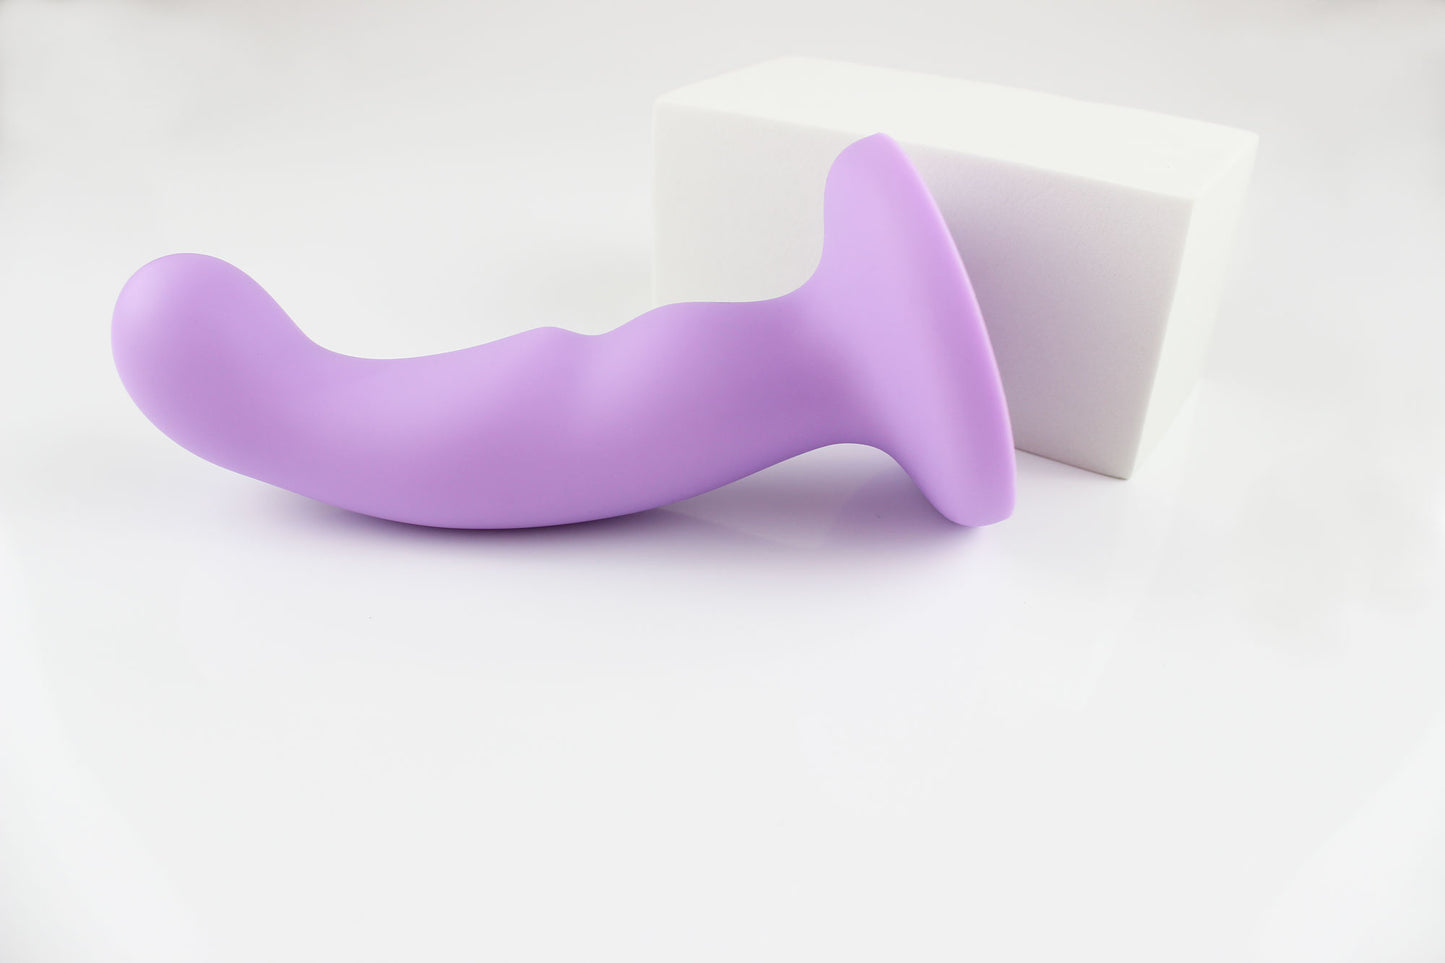 Light purple silicone dildo laying sideways in front of white rectangular block on white background